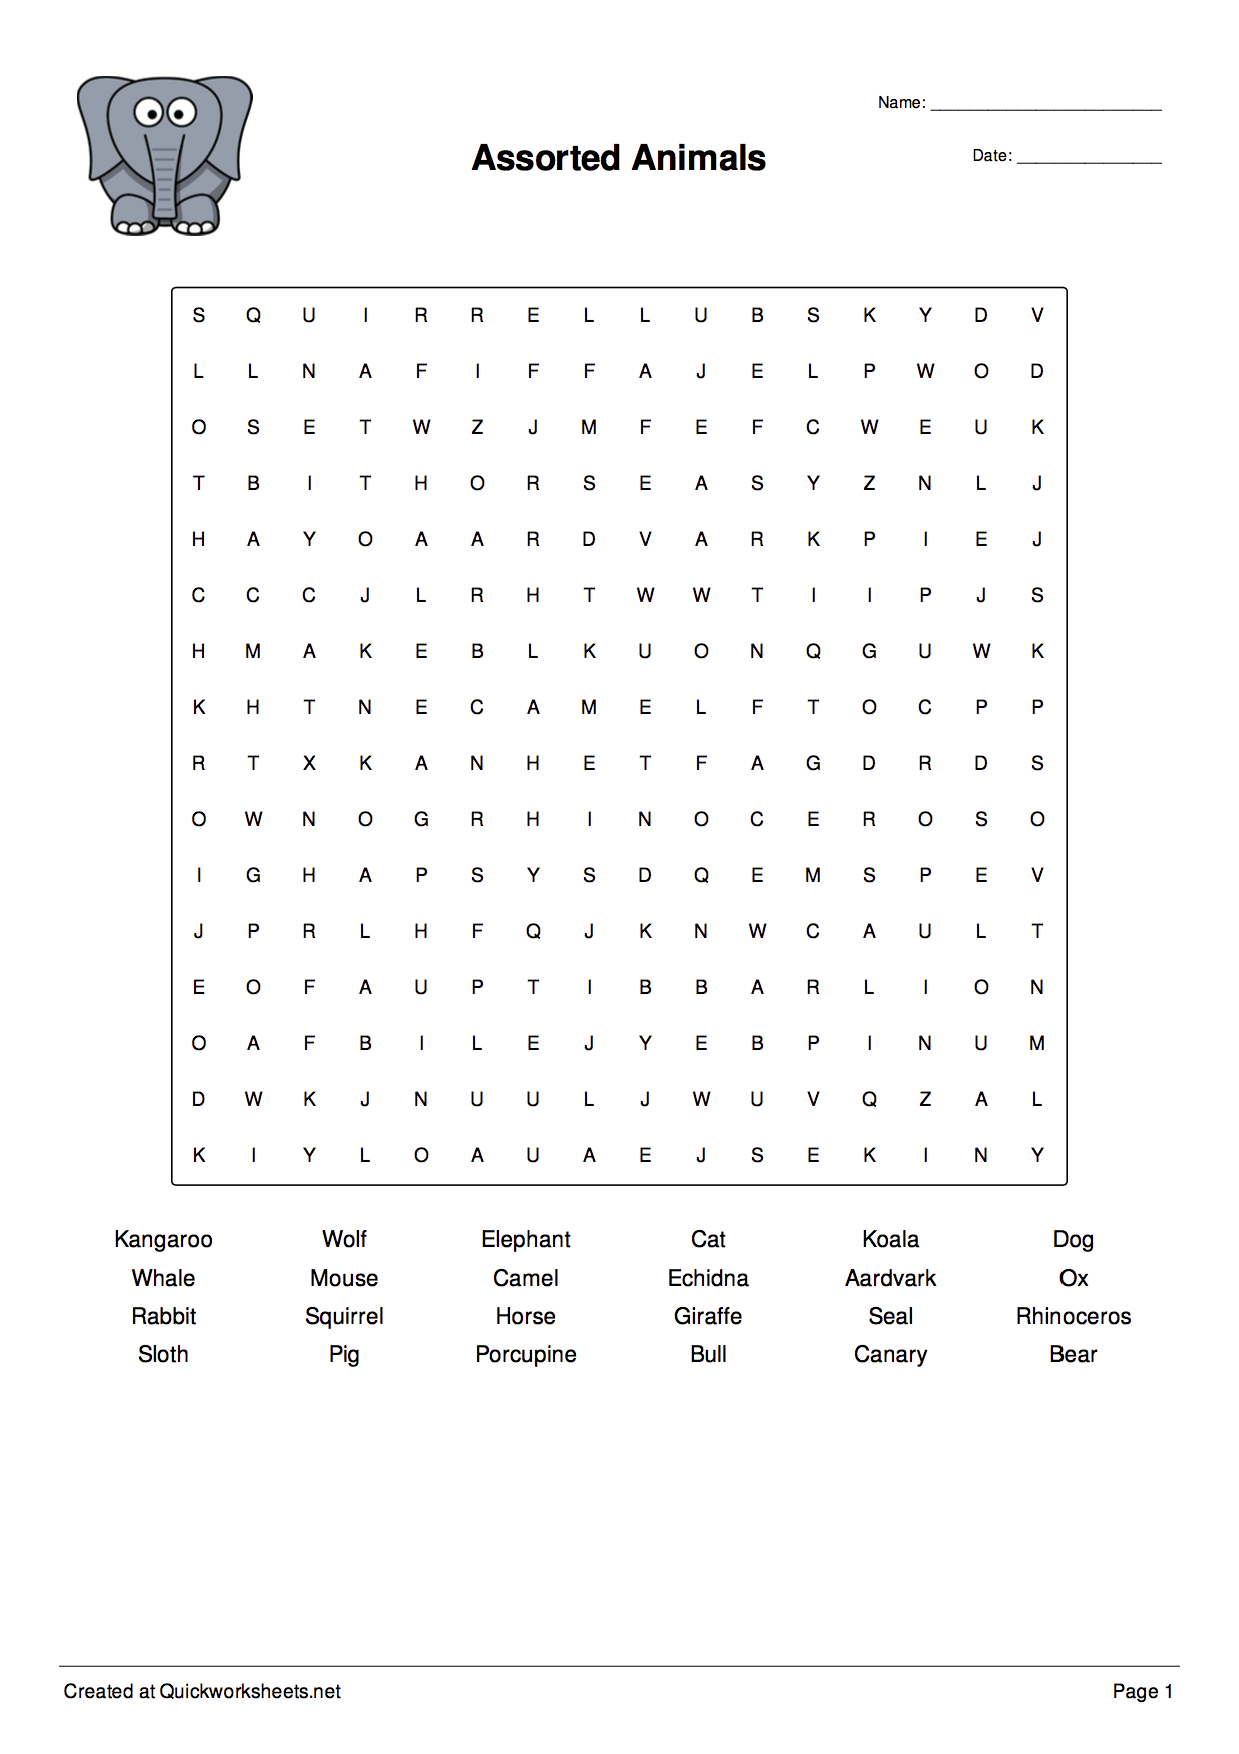 Word Scramble, Wordsearch, Crossword, Matching Pairs And Other - Free Word Scramble Maker Printable